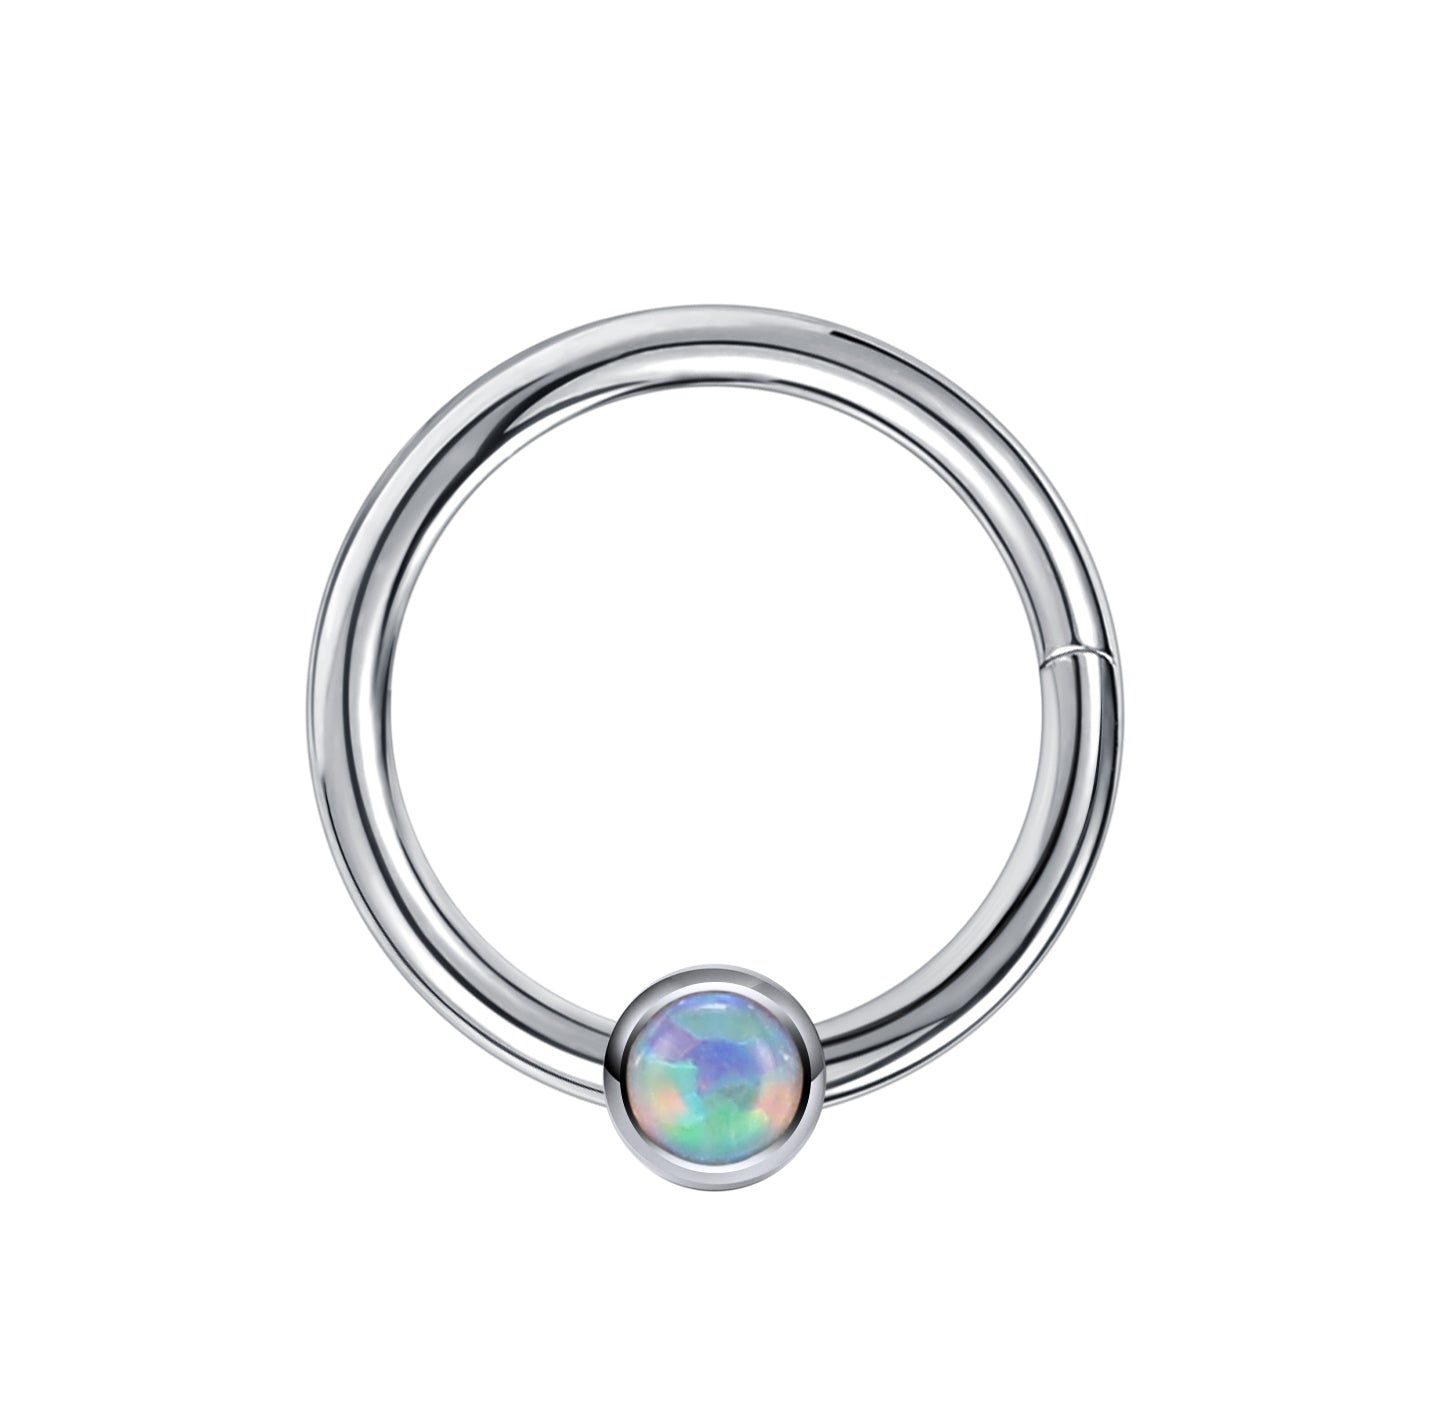 16g-opal-septum-ring-3-colors-stainless-steel-helix-cartilage-piercing